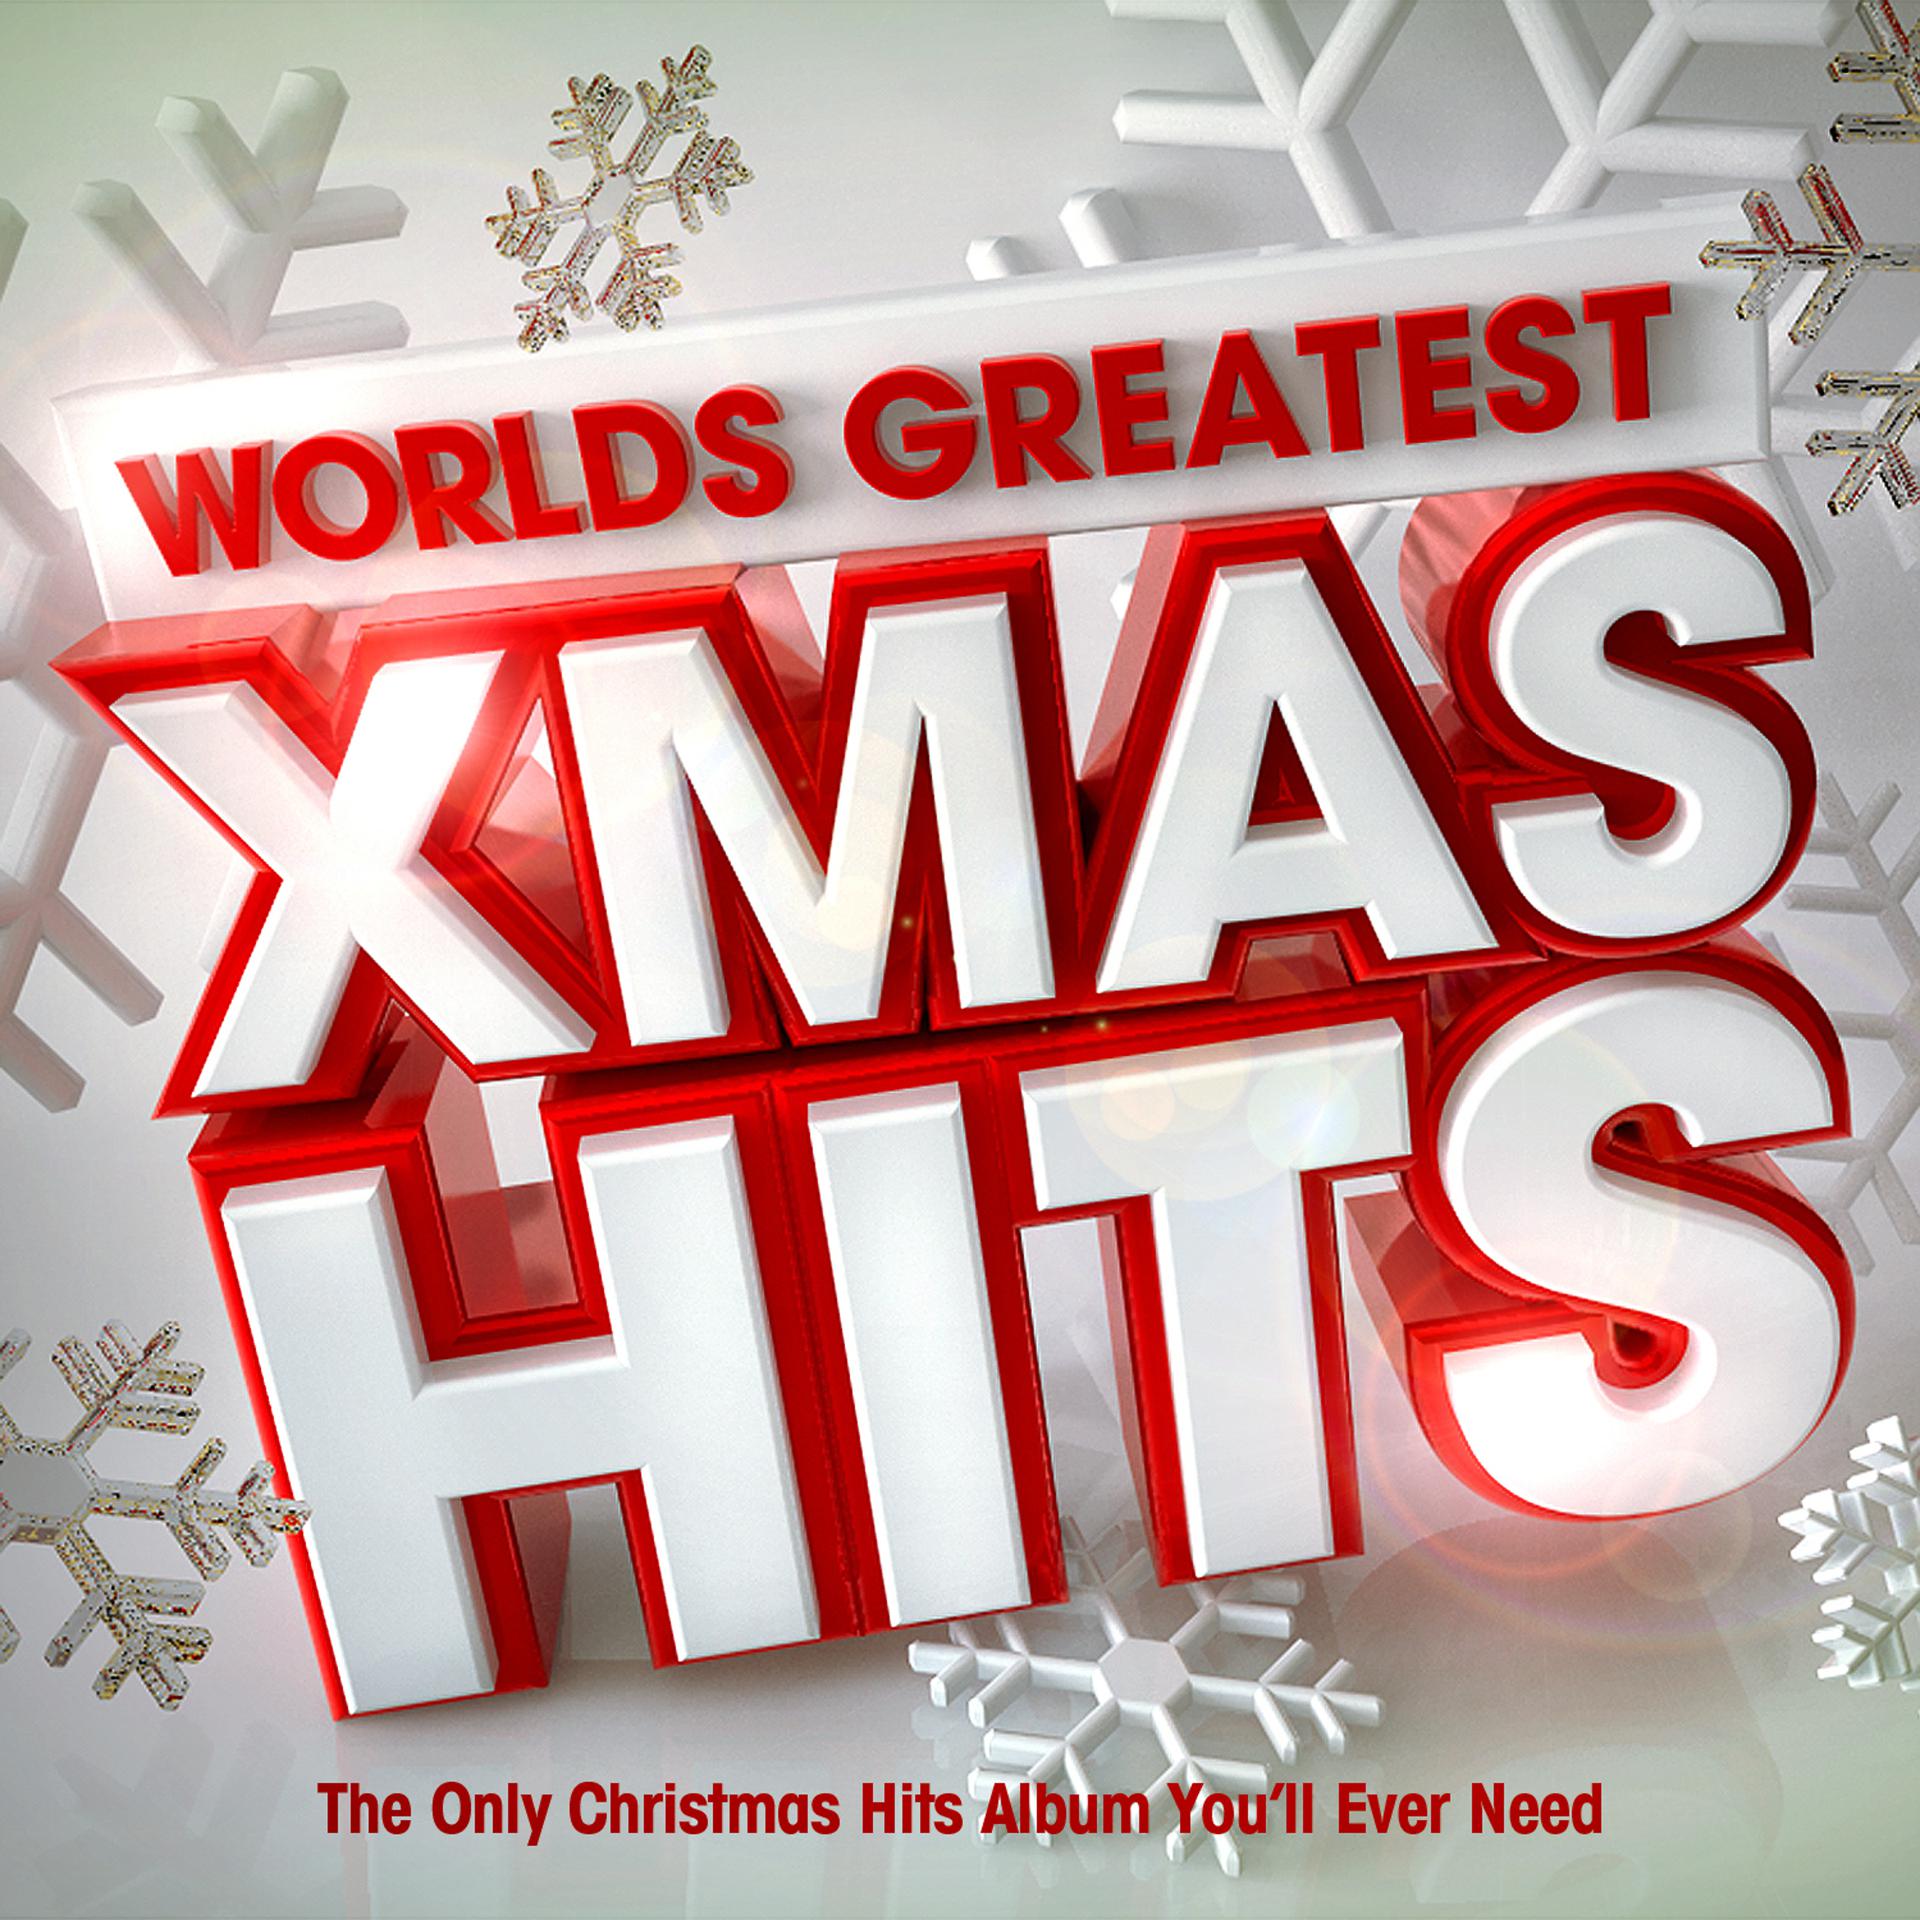 Постер альбома Worlds Greatest Xmas Hits 2012 - The Only Christmas Hits Album You'll Ever Need (Festive Version)